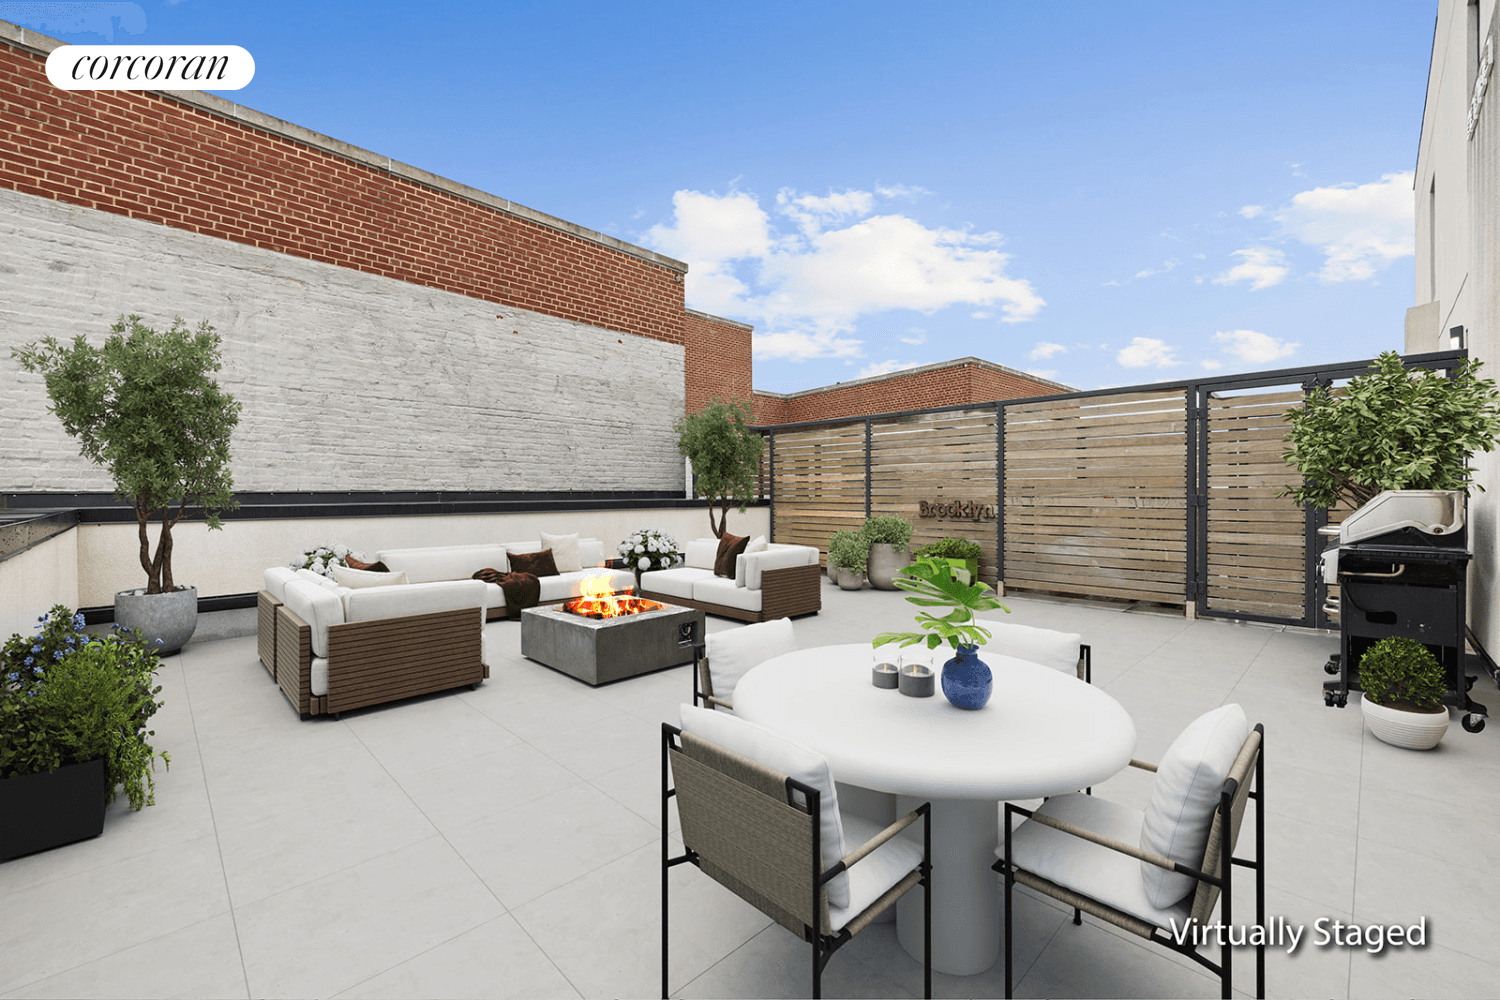 THE HYPE IS REAL ! This apartment features one of the largest private outdoor spaces currently on the market in this price category !